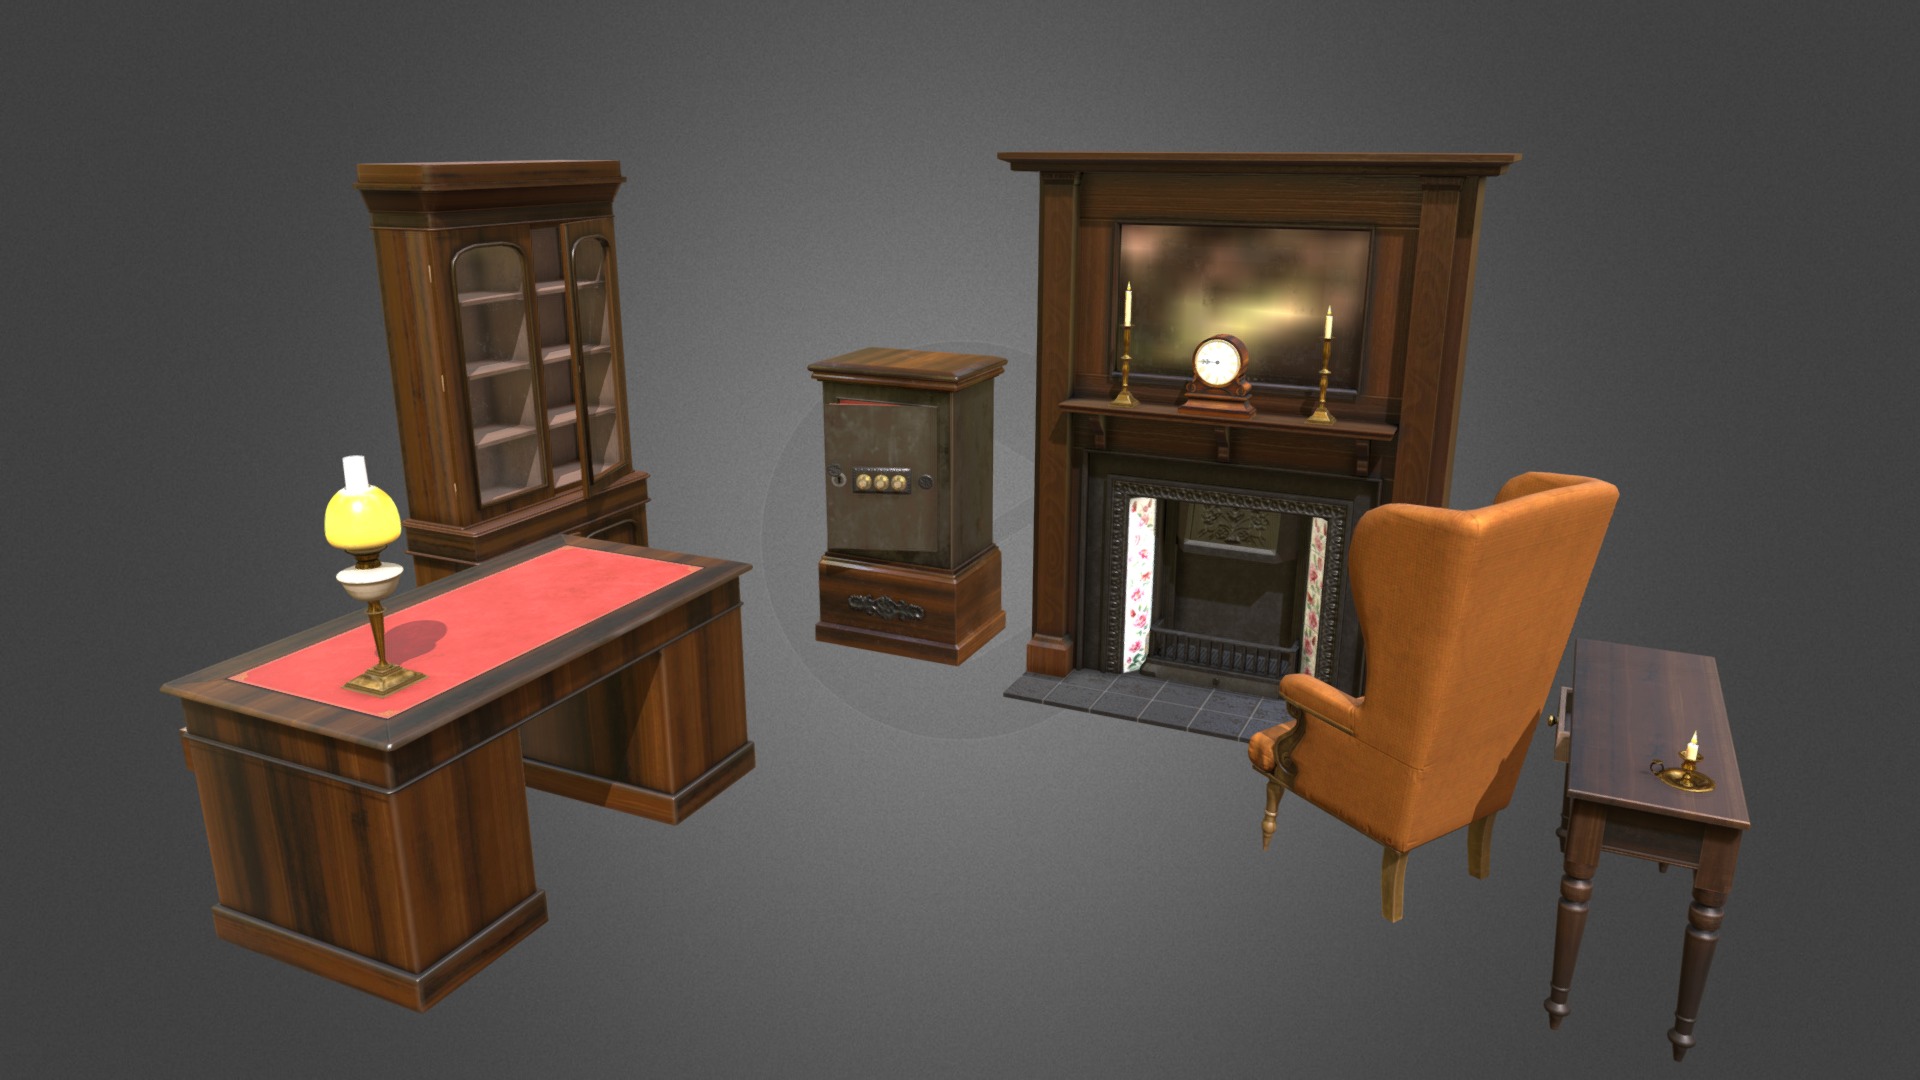 3D model Antique furniture - This is a 3D model of the Antique furniture. The 3D model is about a table and chairs with a television on top of it.